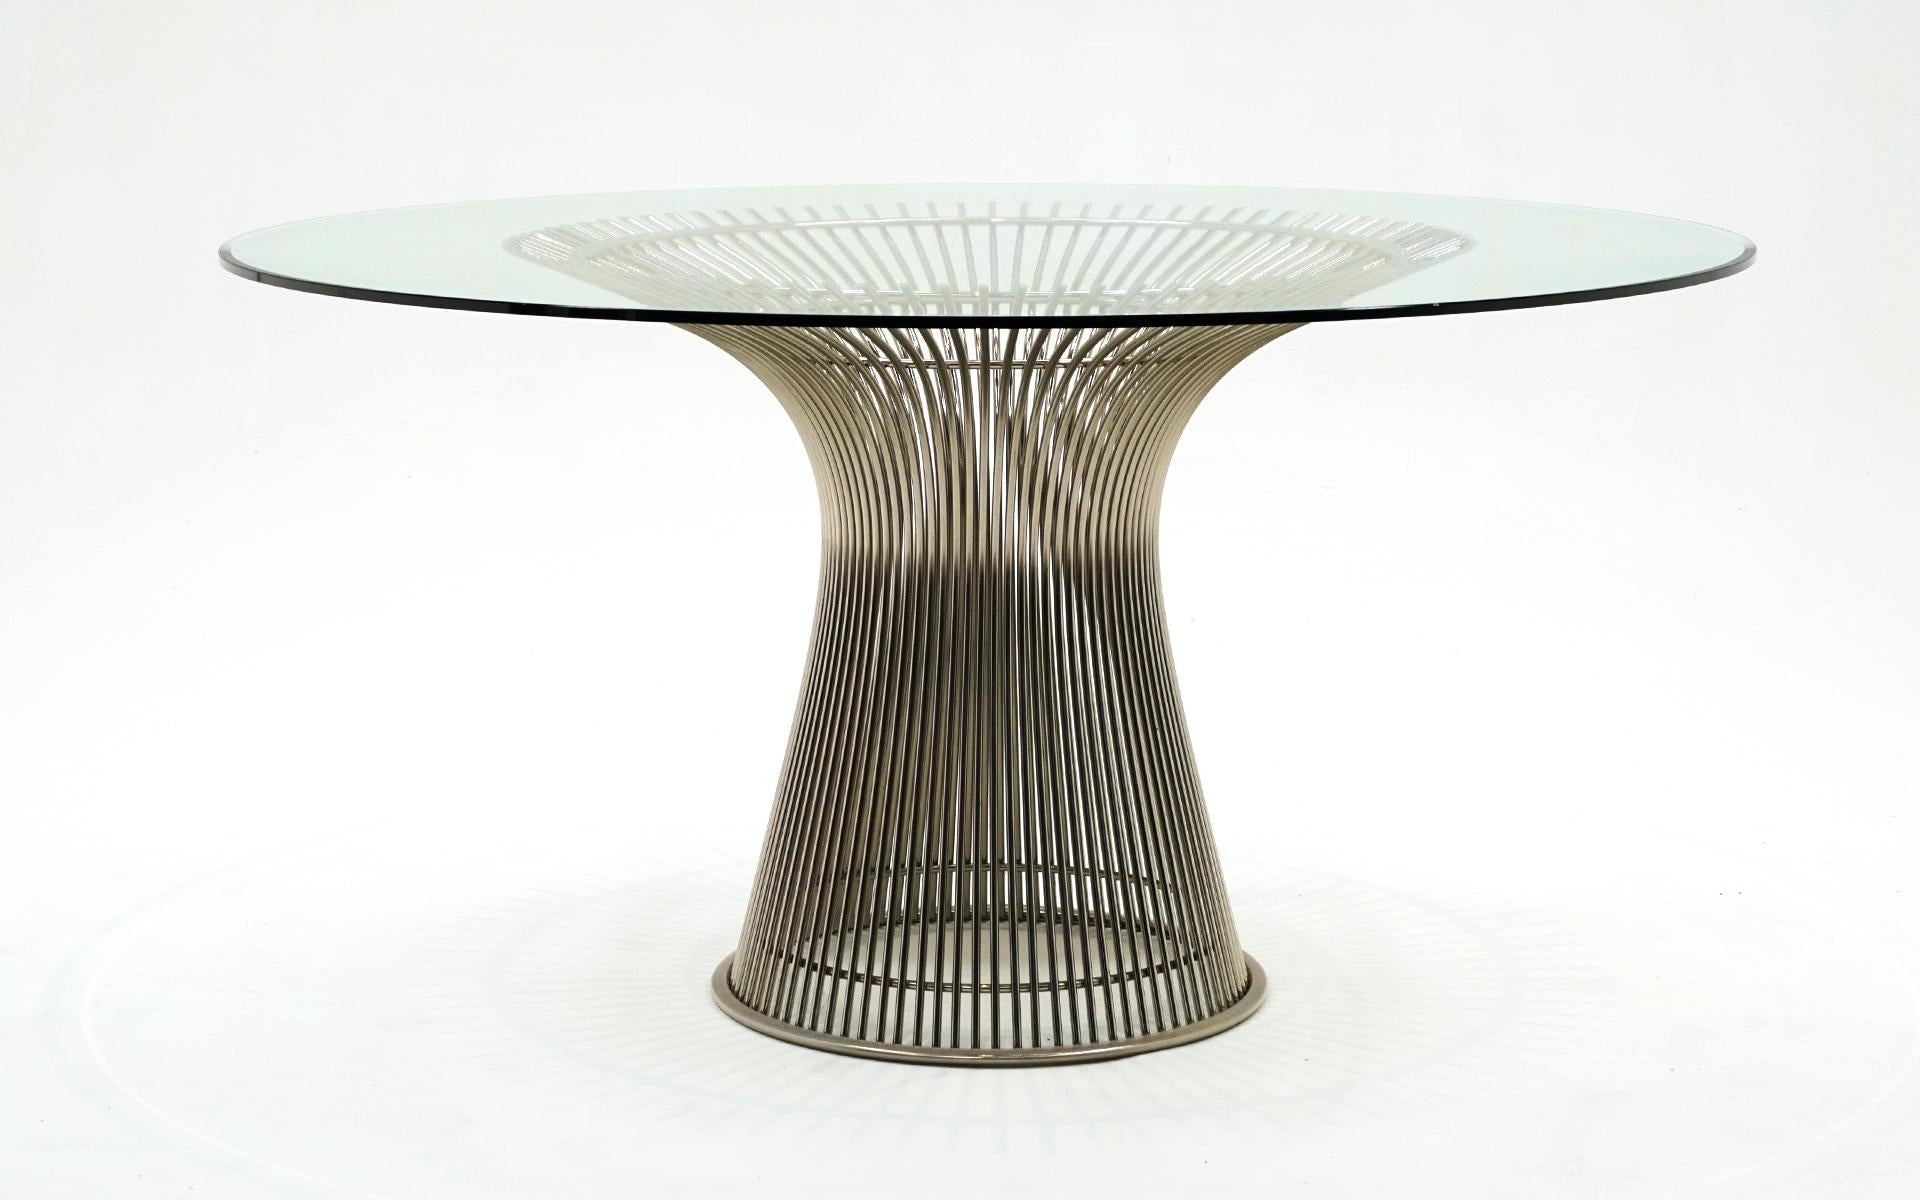 Early Warren Platner Dining Table with the original 54 inch beveled edge glass top in amazingly good condition.  The glass top is free of any significant scratches, no chips or repairs.  There may be very light scratches upon close inspection.  That